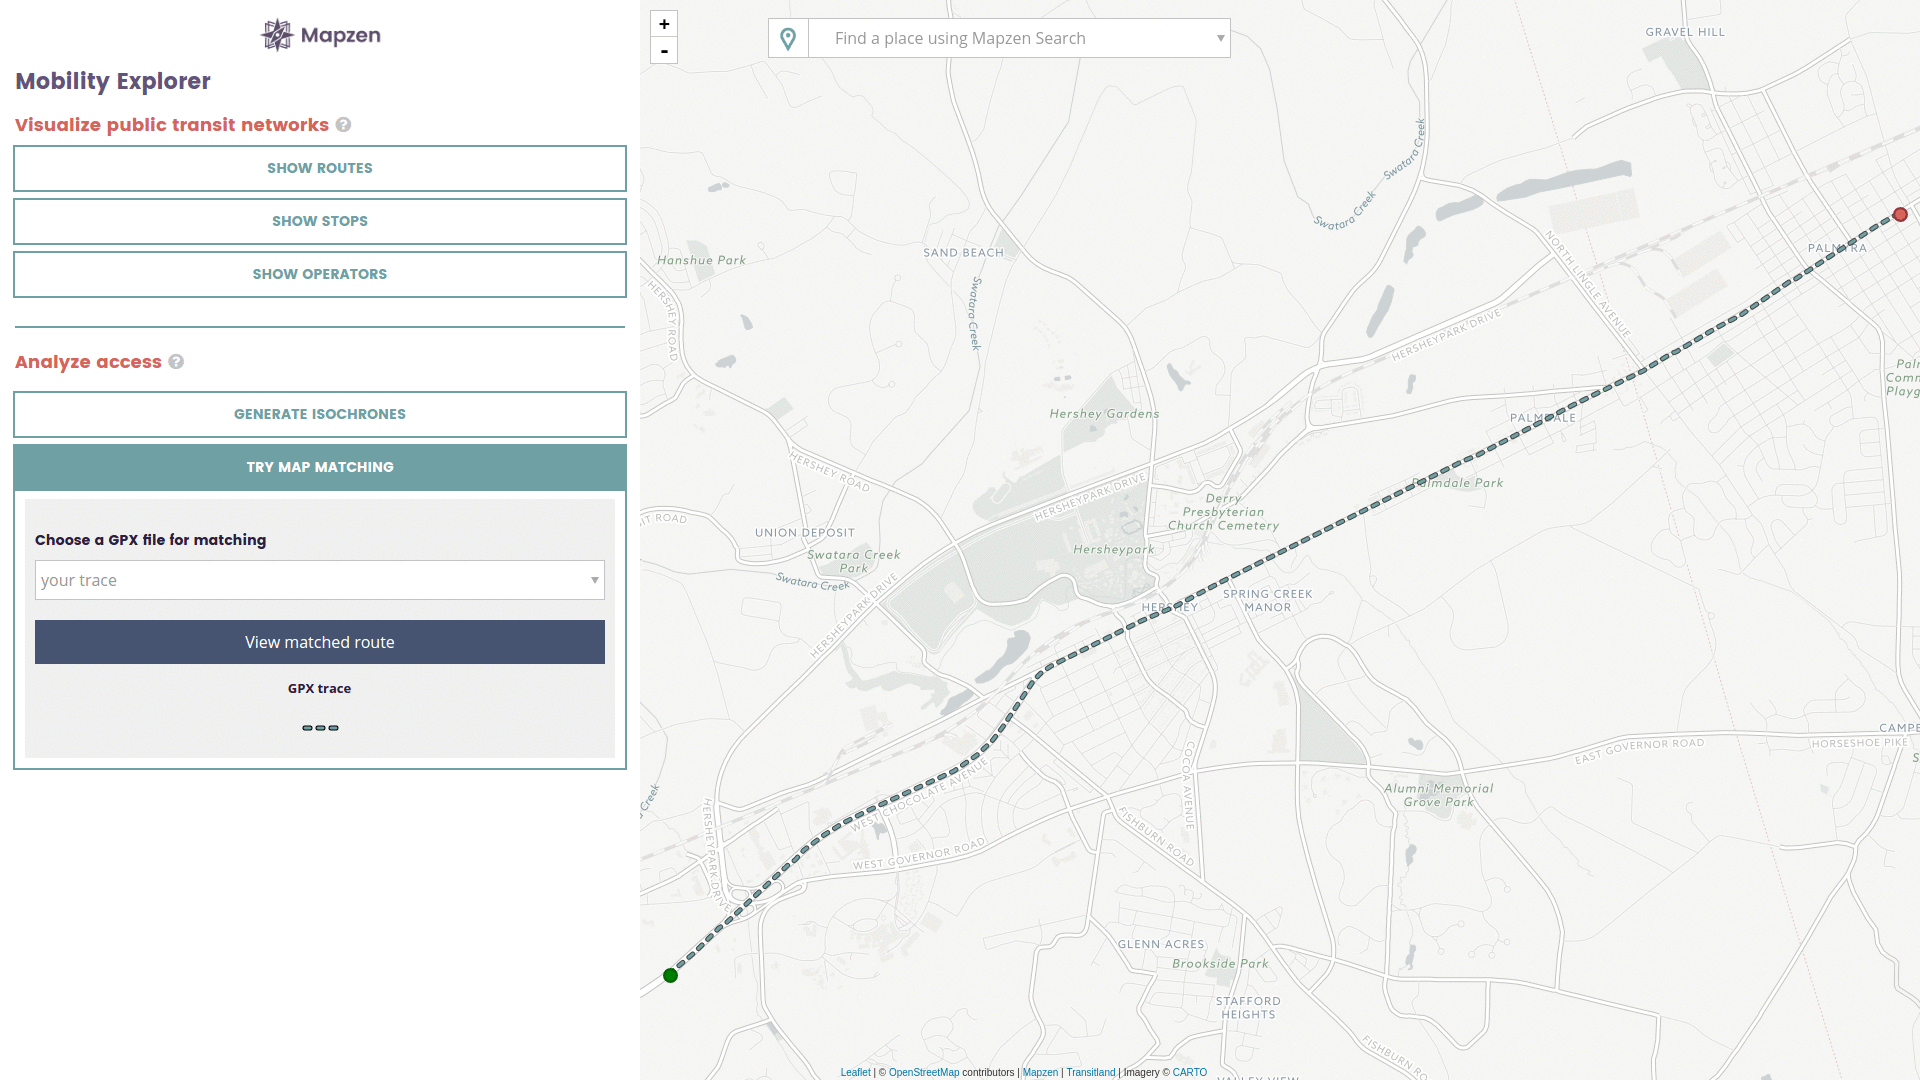 animated map showing speed limits along a route in Hershey, PA